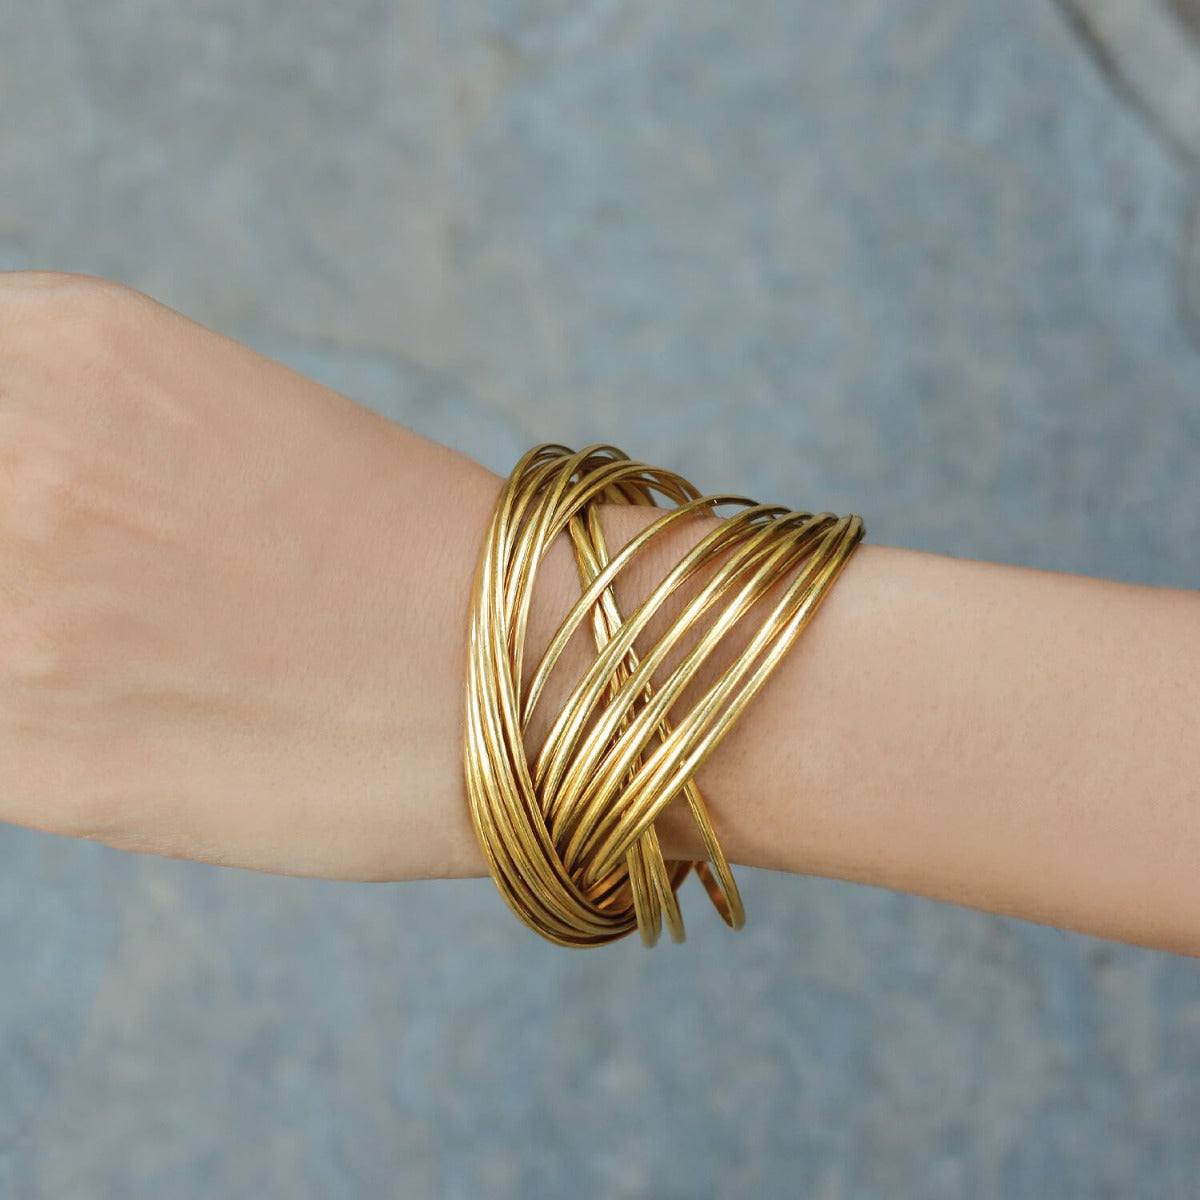 Charming gold plated silver interlinked  bangle